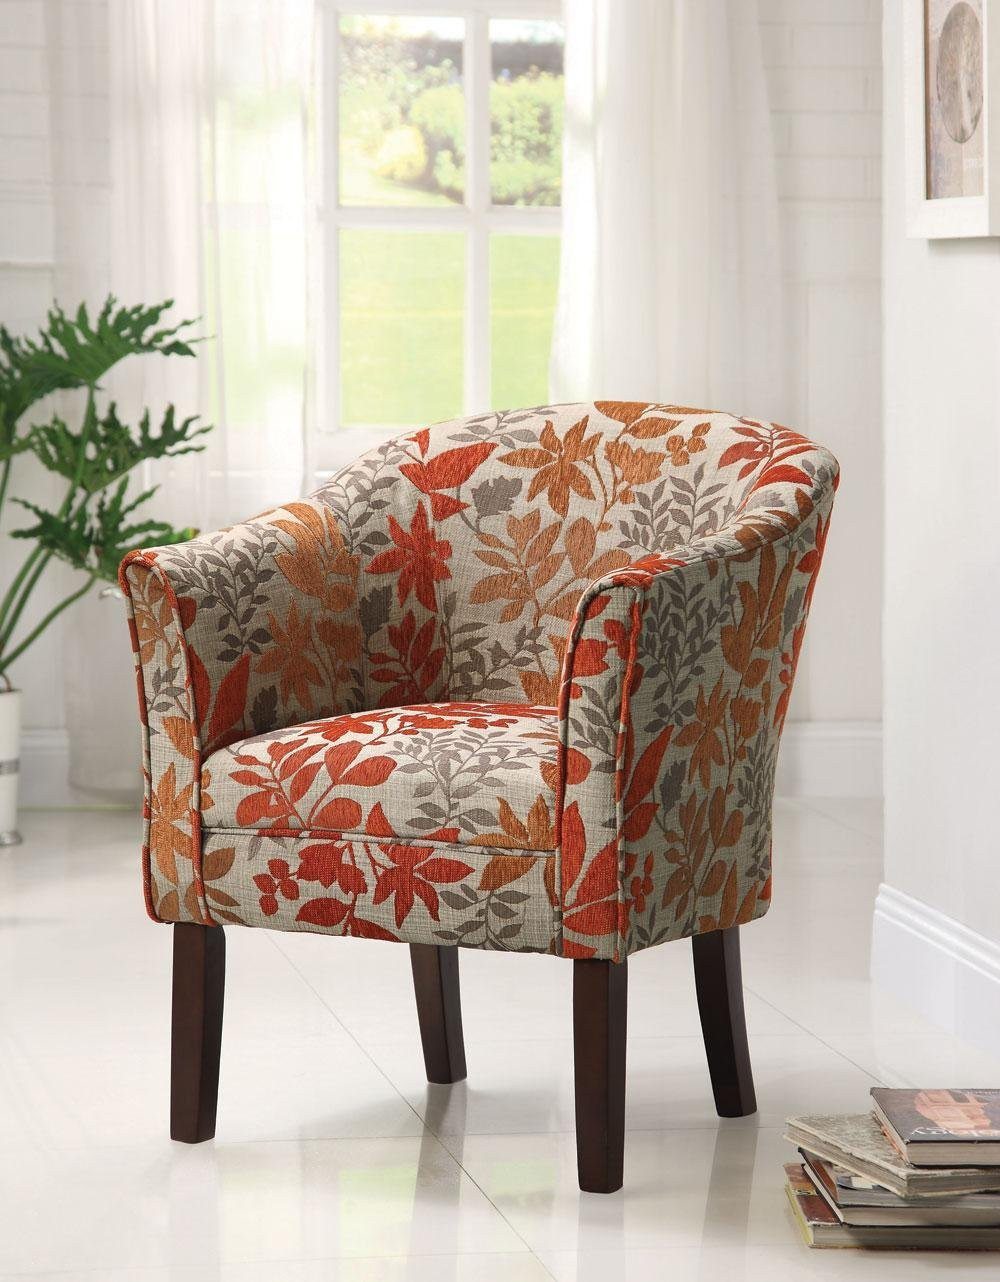 Accent Chairs Living Room Luxury Accent Chairs For Living Room 23 Reasons To Of Accent Chairs Living Room 